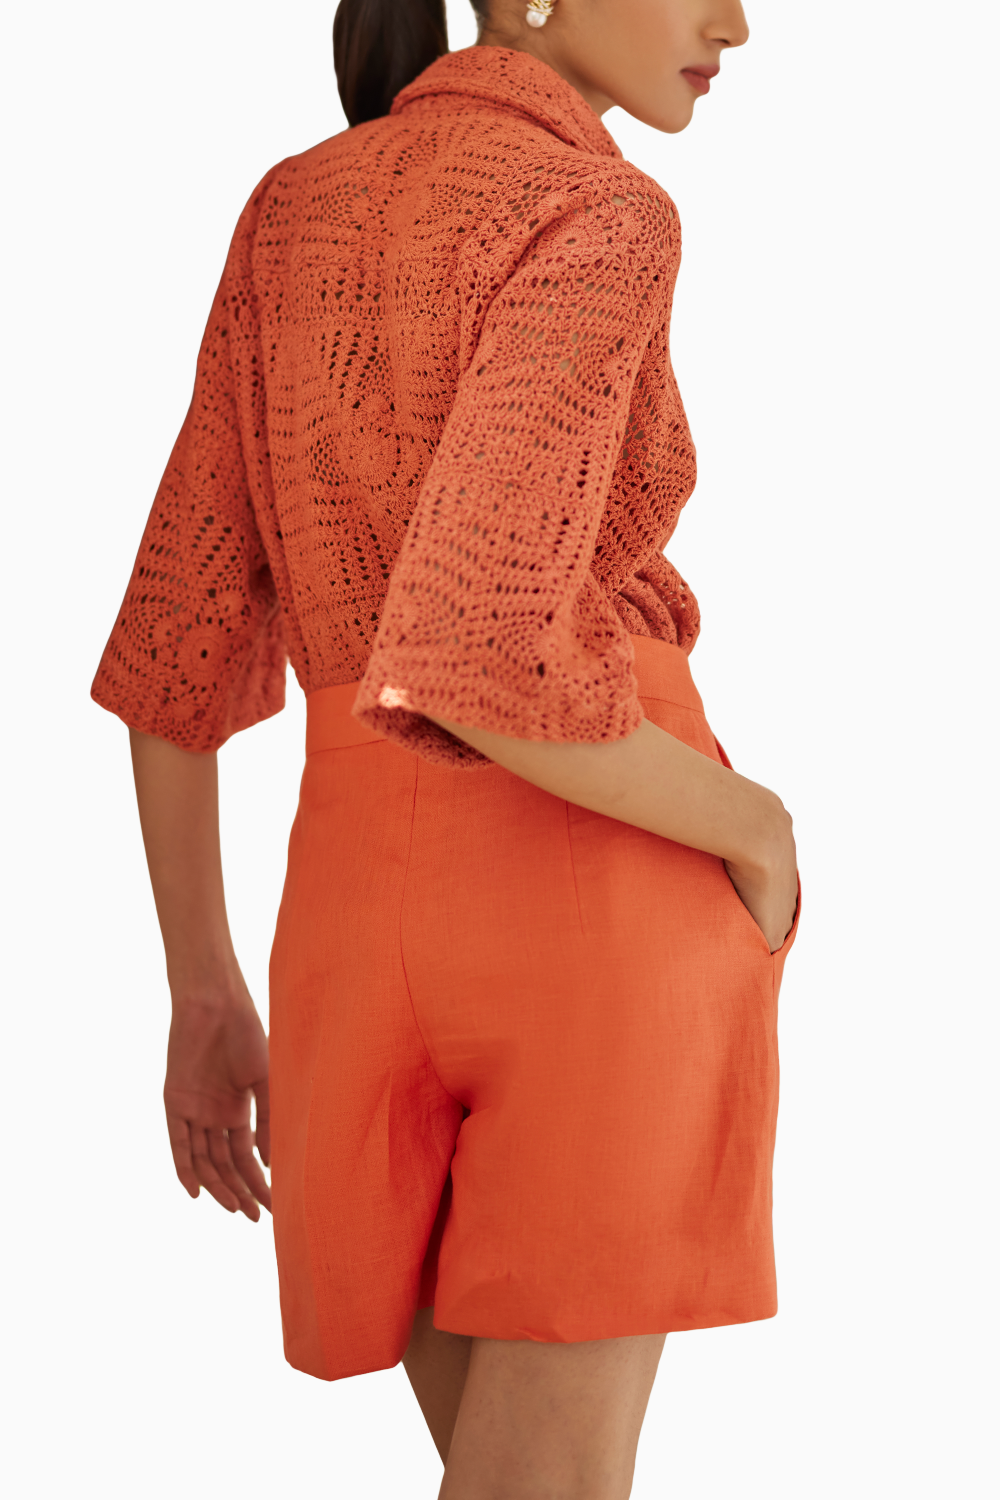 Rust Crochet Shirt with Peony Short and Jacket